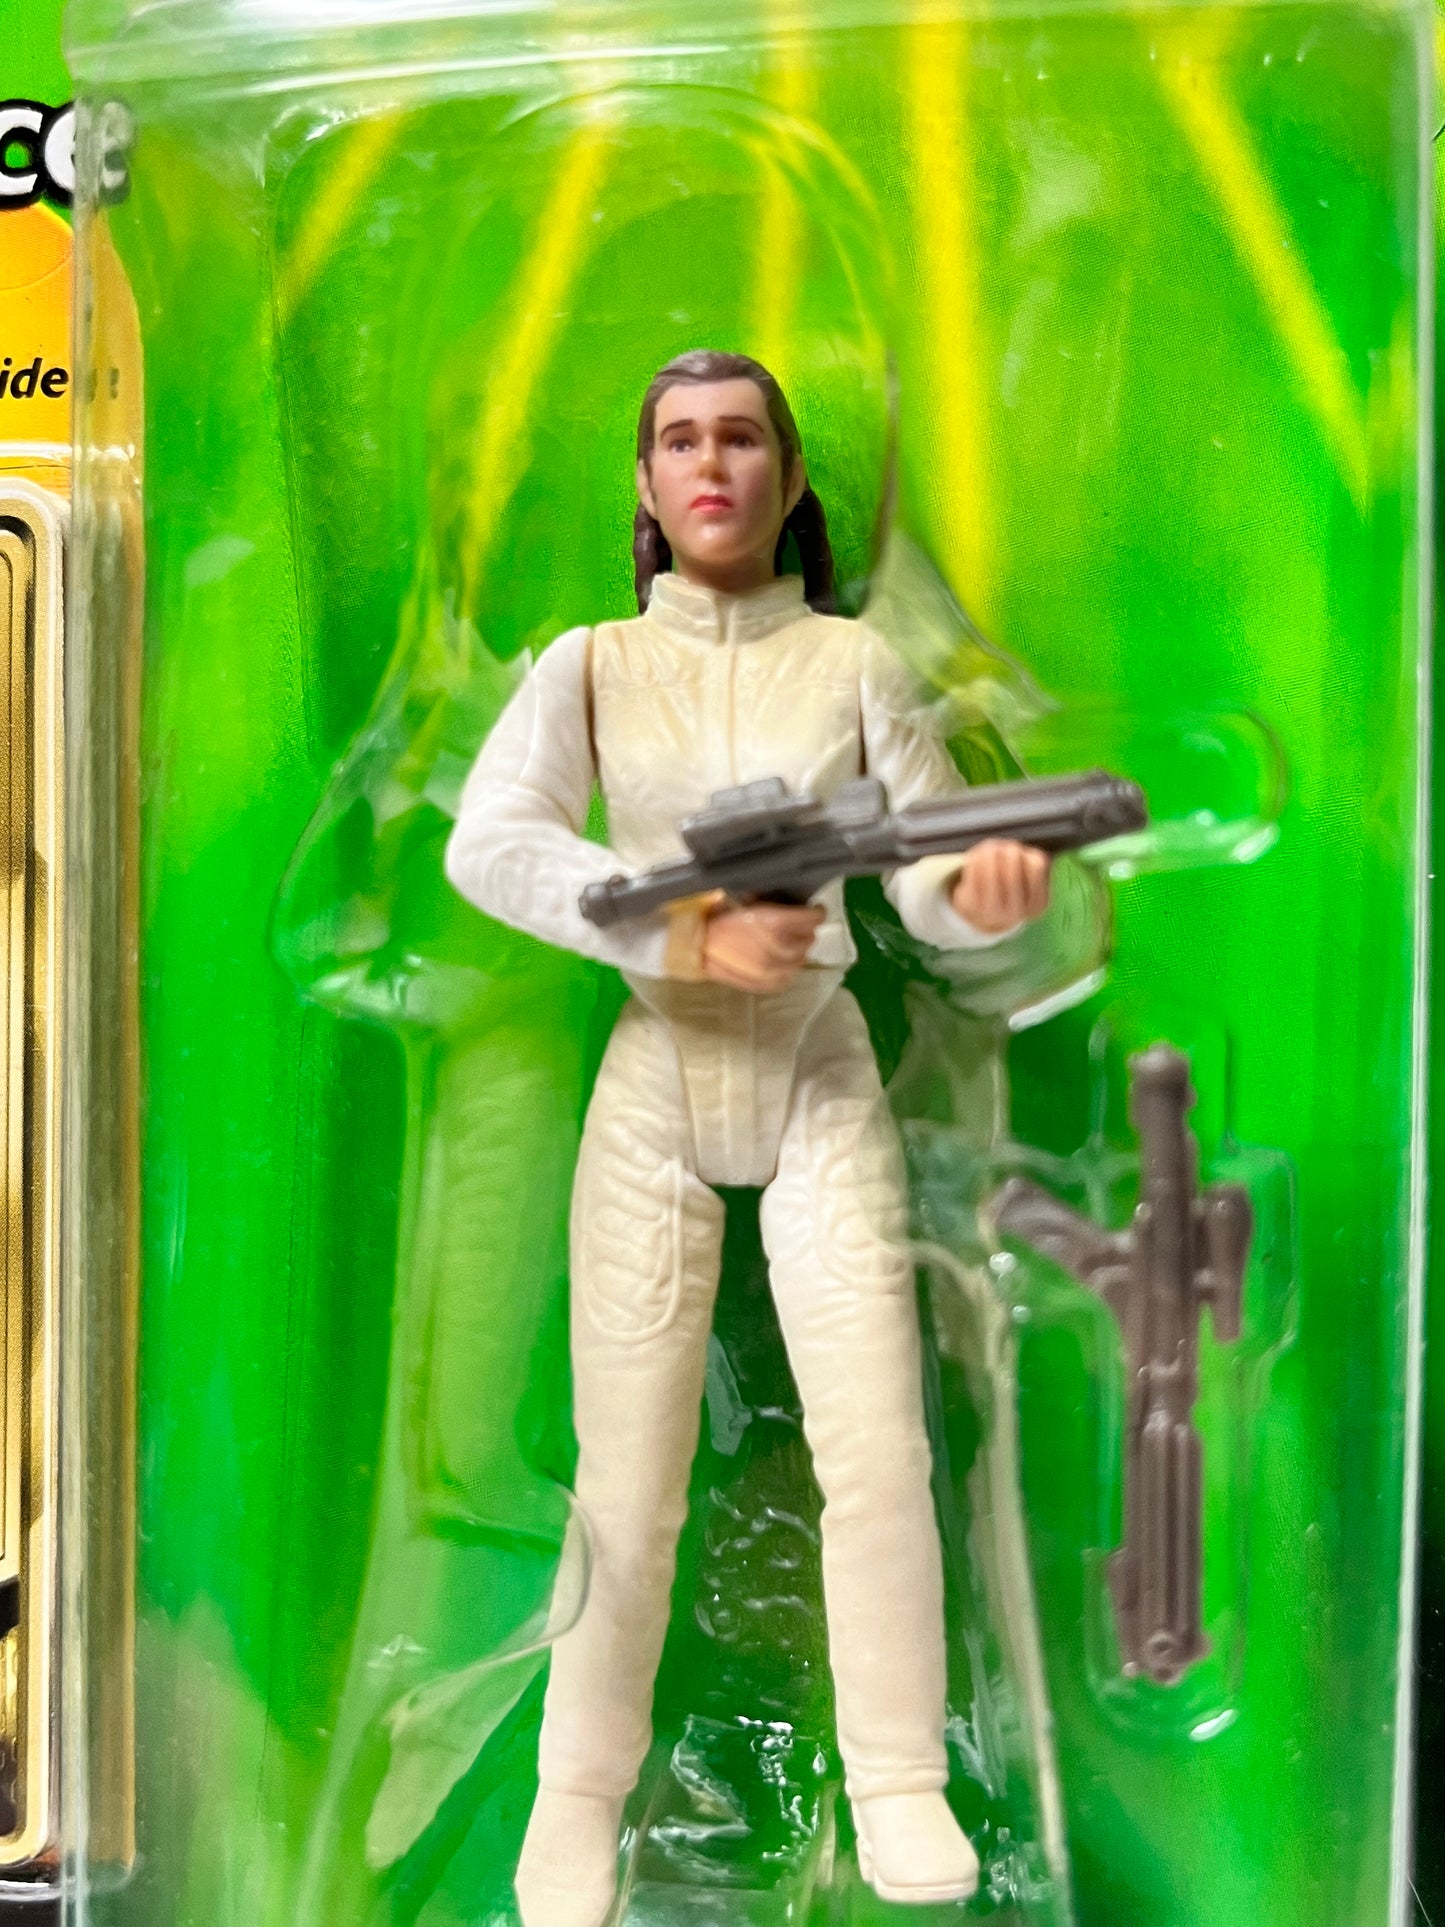 Star Wars Power Of The Jedi Leia Organa Bespin Escape Action Figure